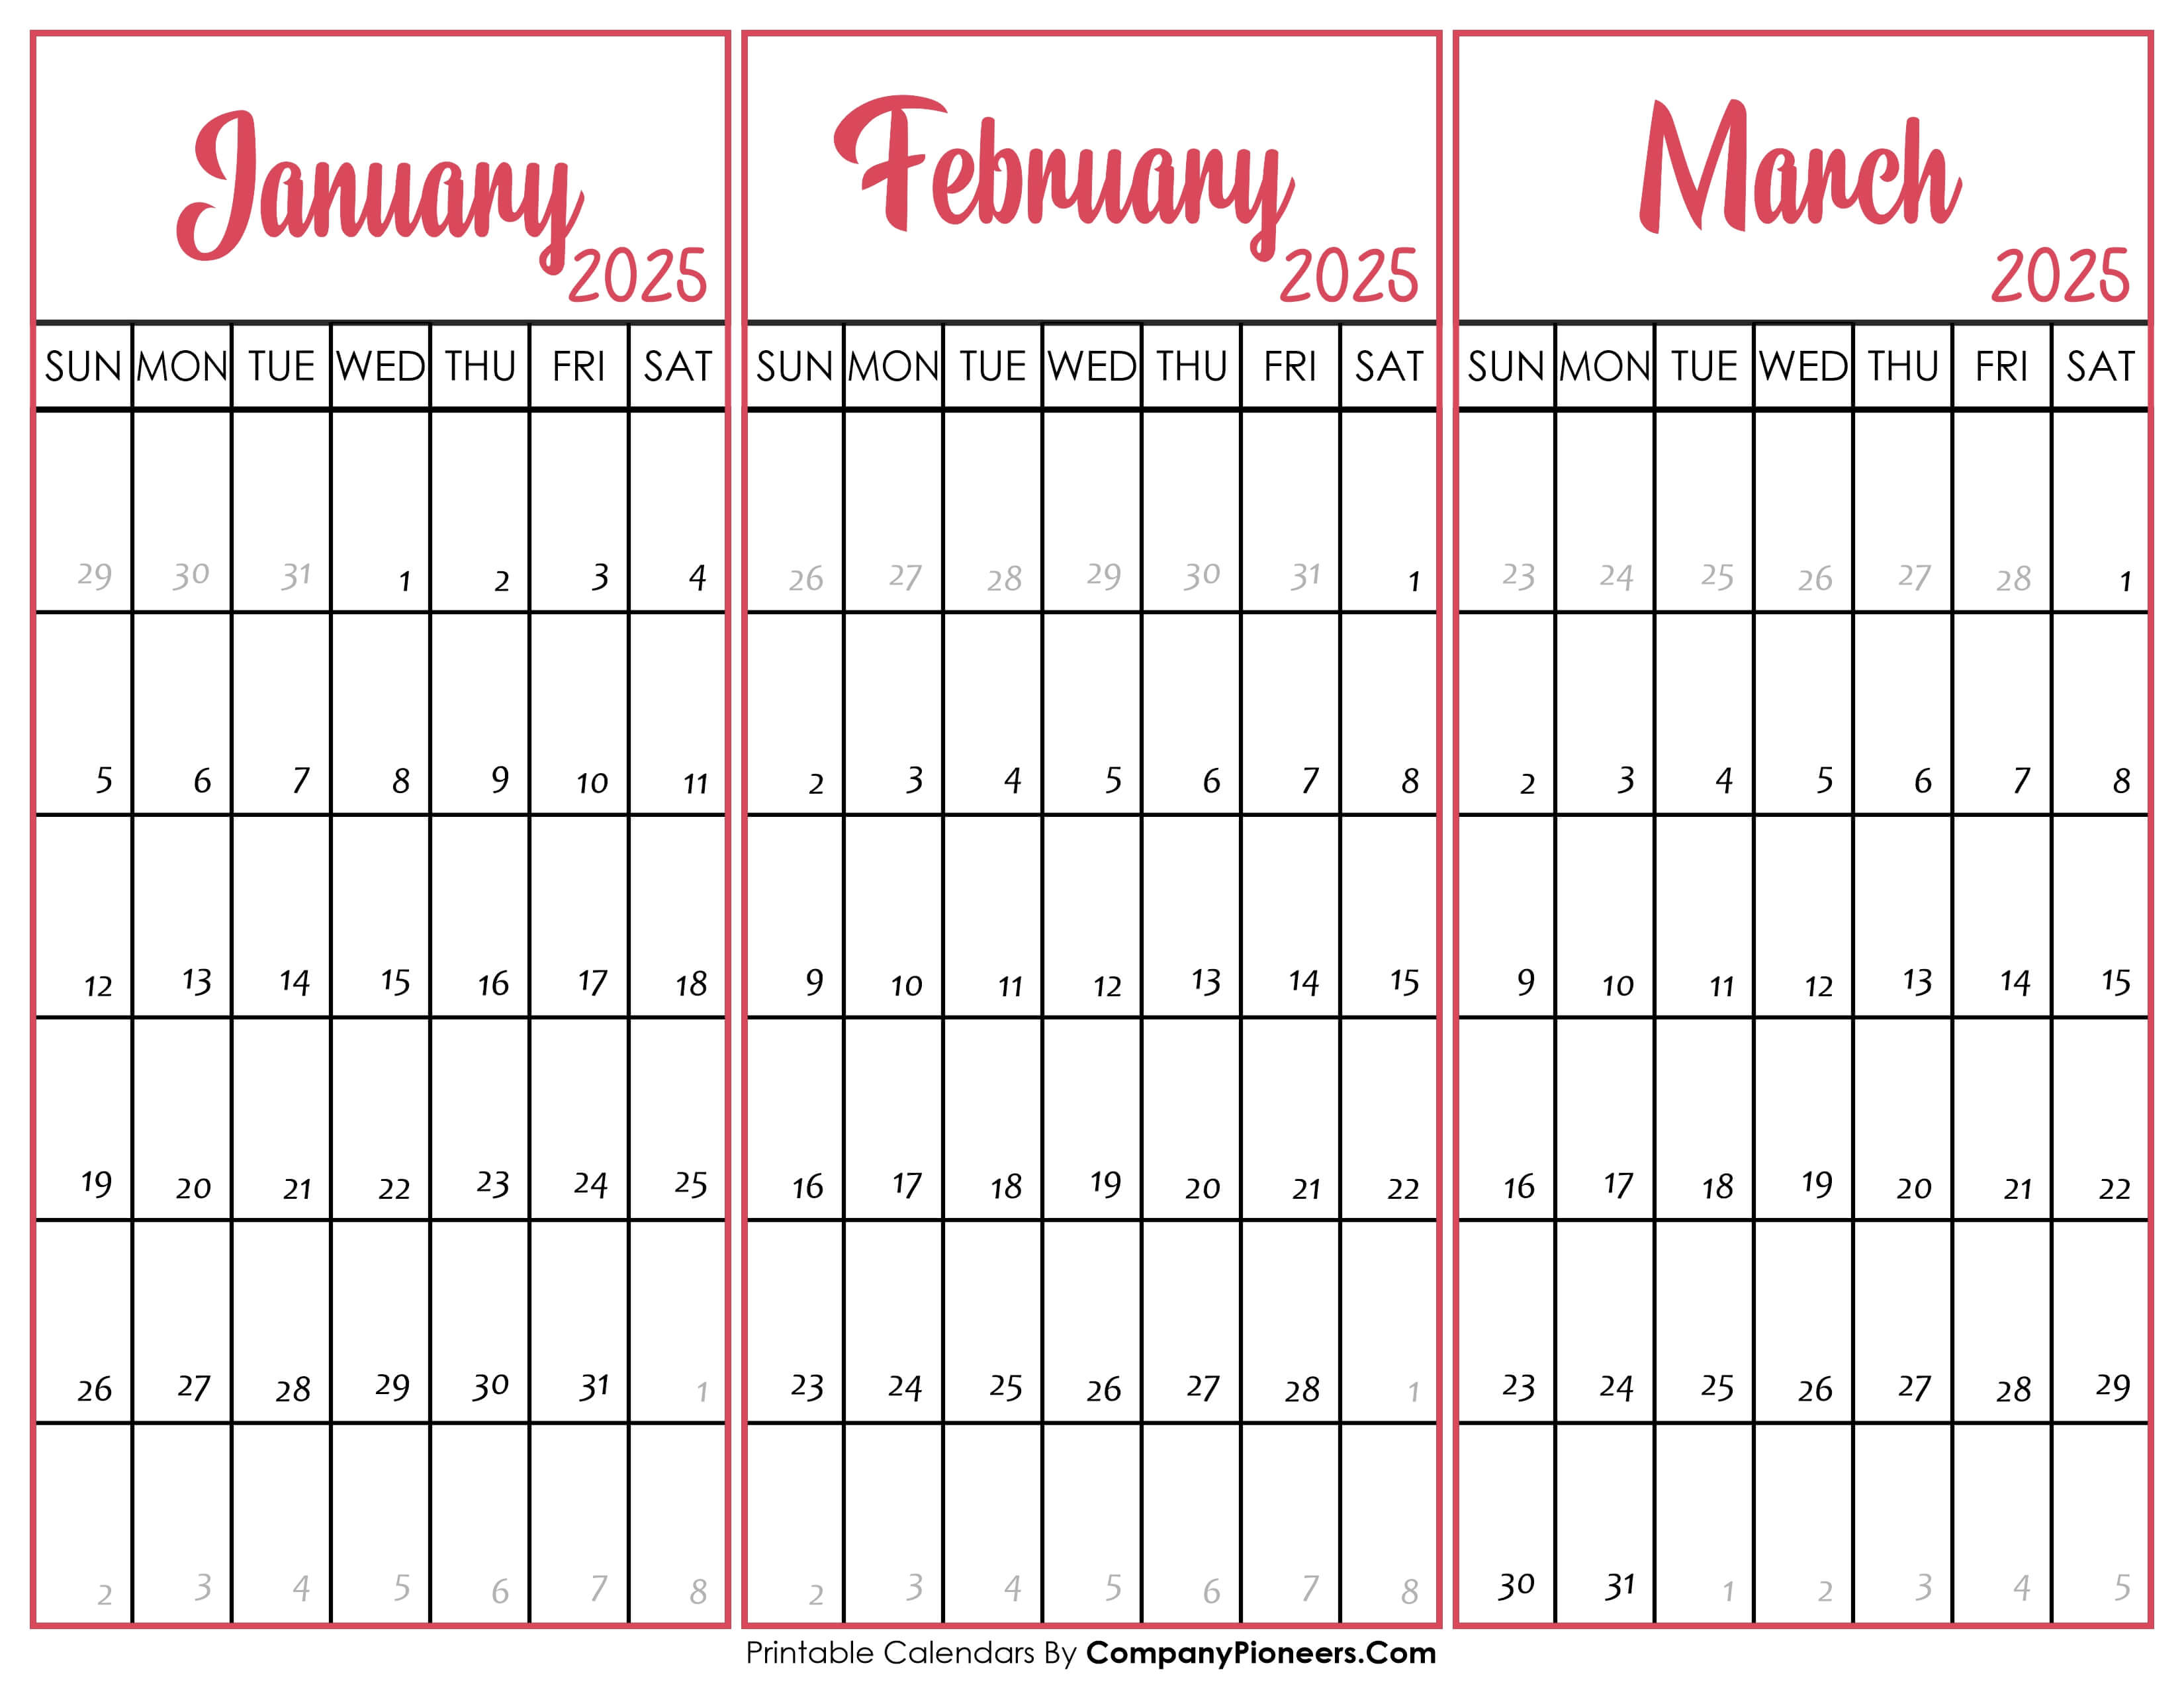 January February and March 2025 Calendar